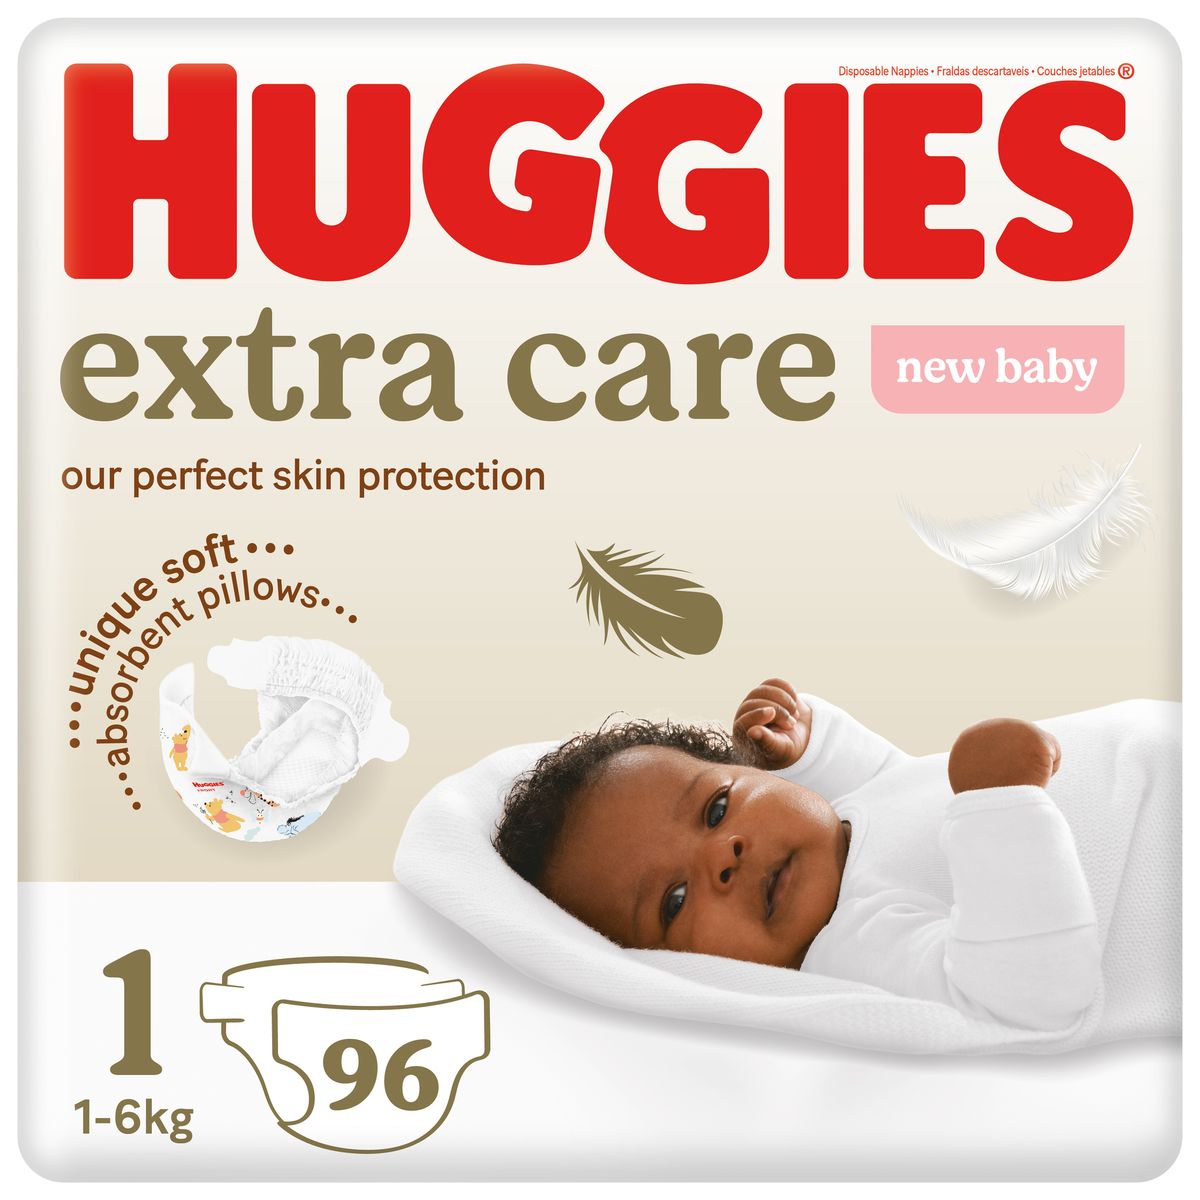 Huggies - Is your little one as excited about Our Perfect